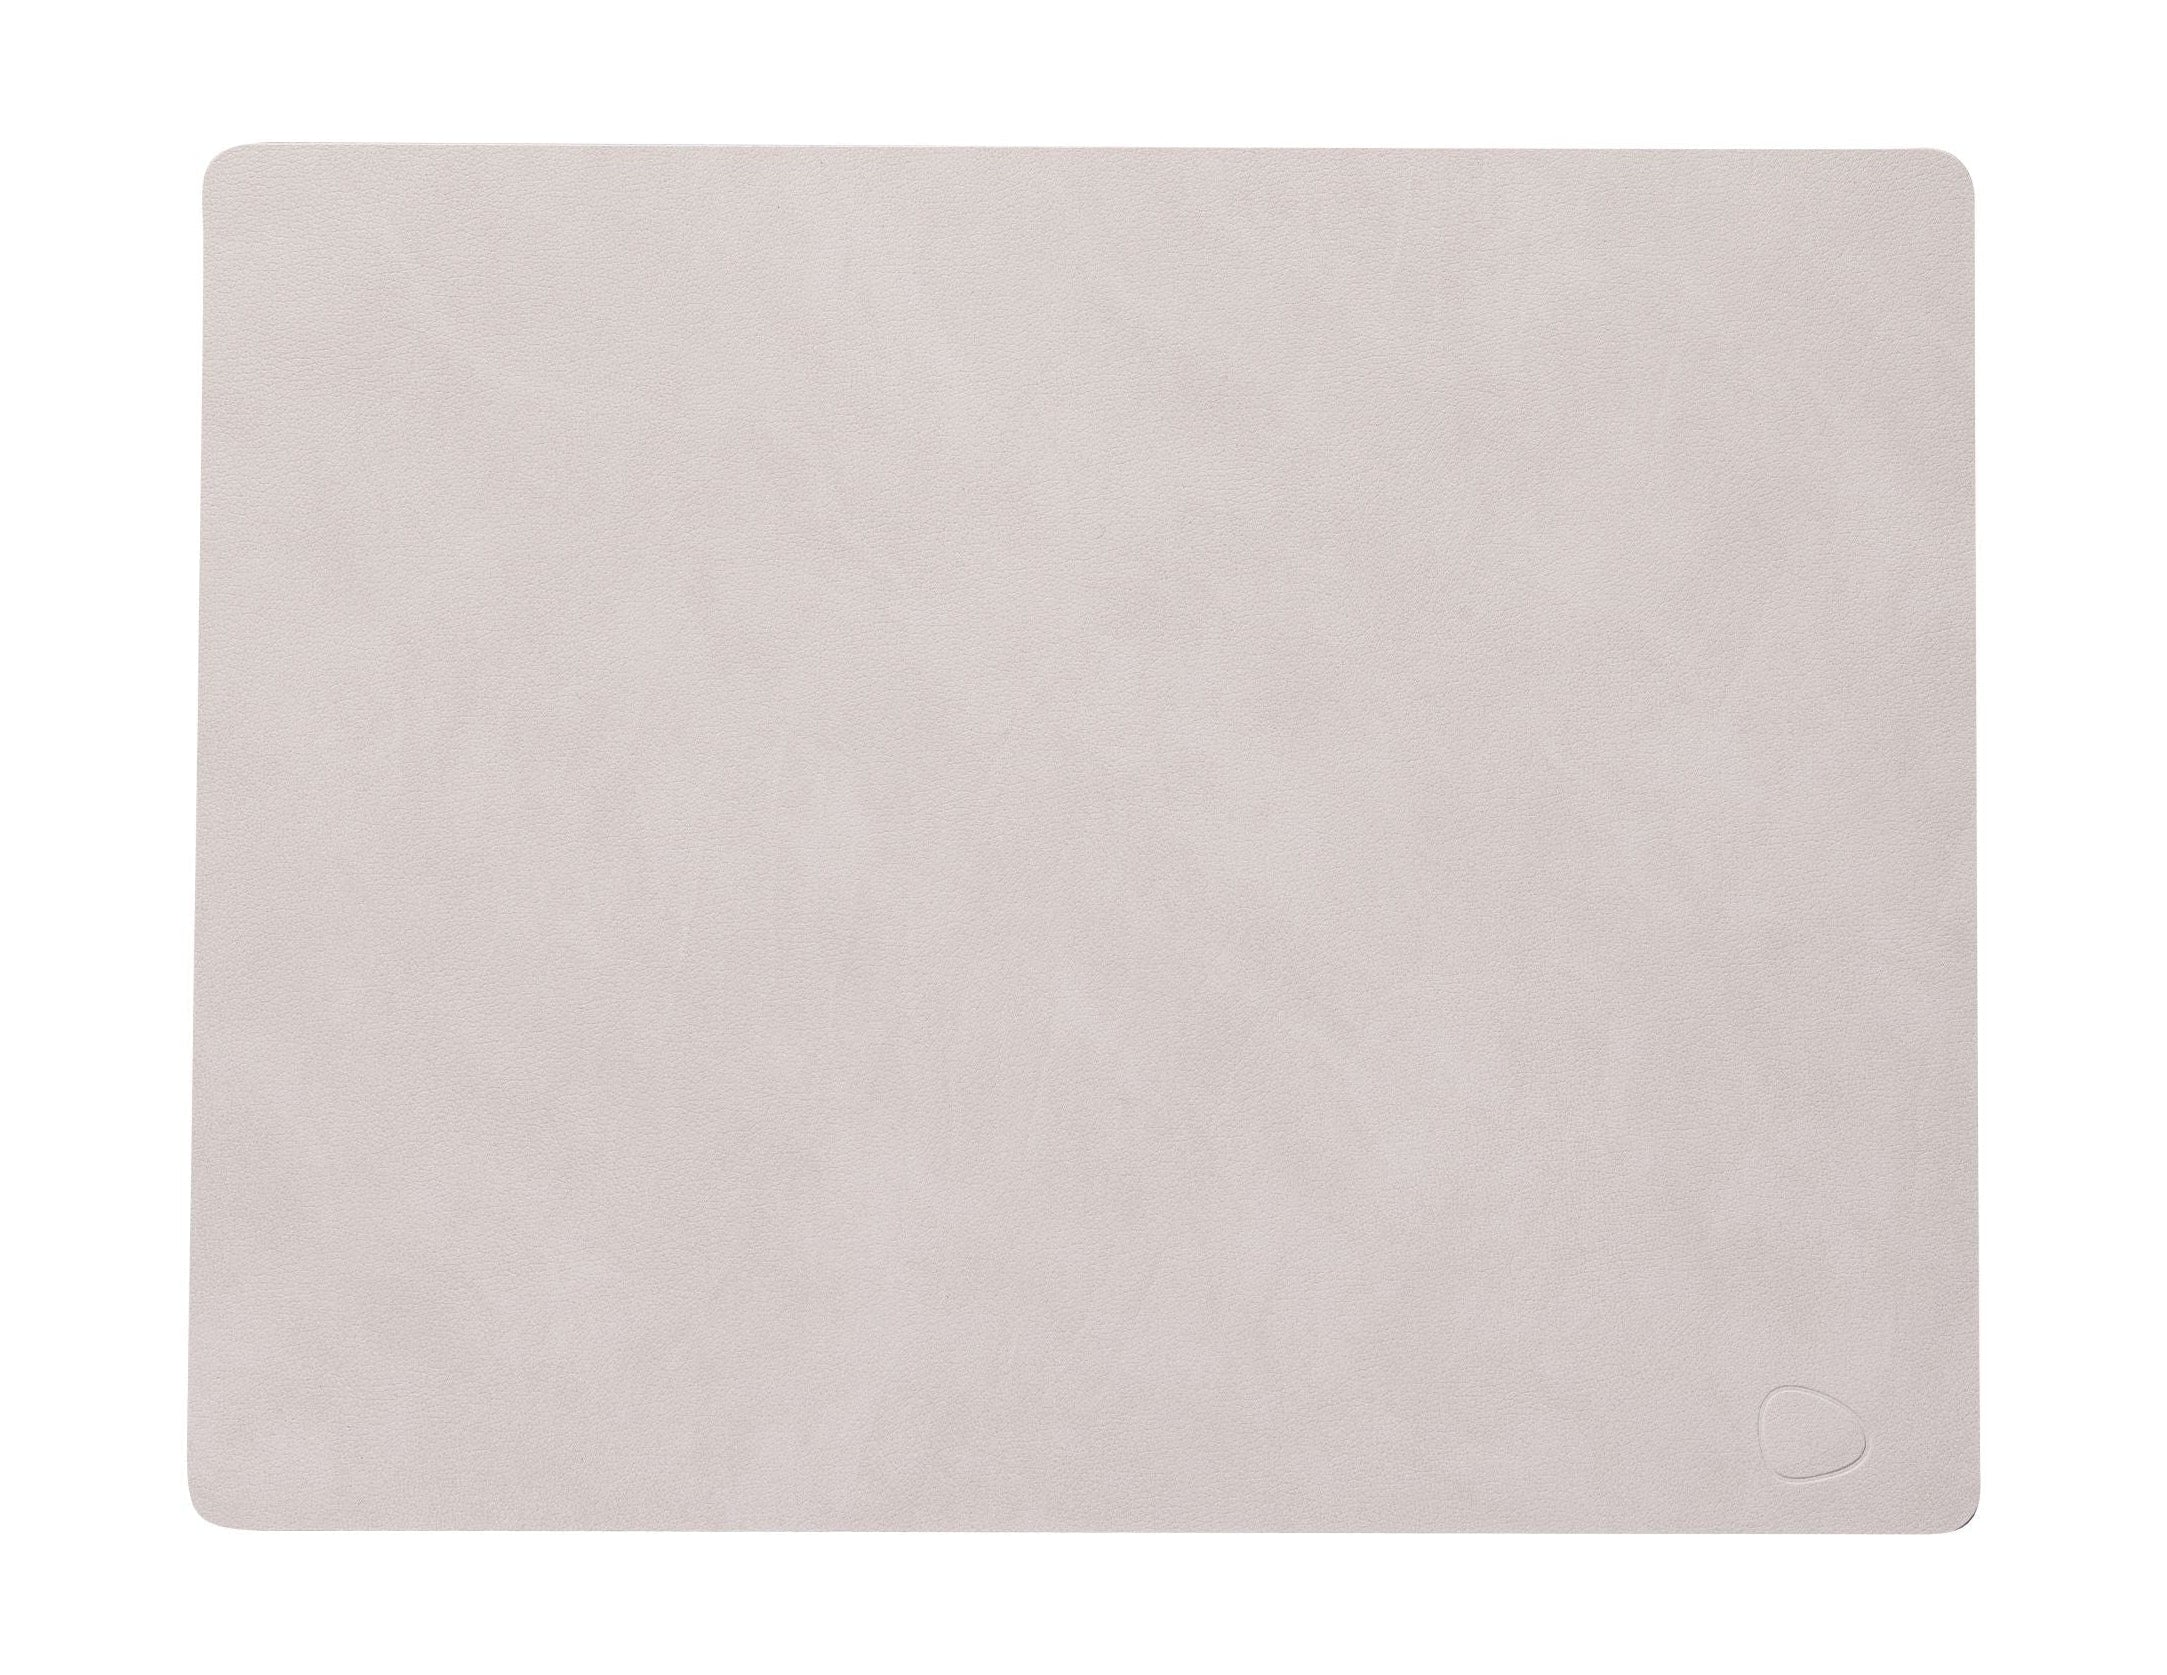 Lind DNA Bord MAT Square L, Oyster White